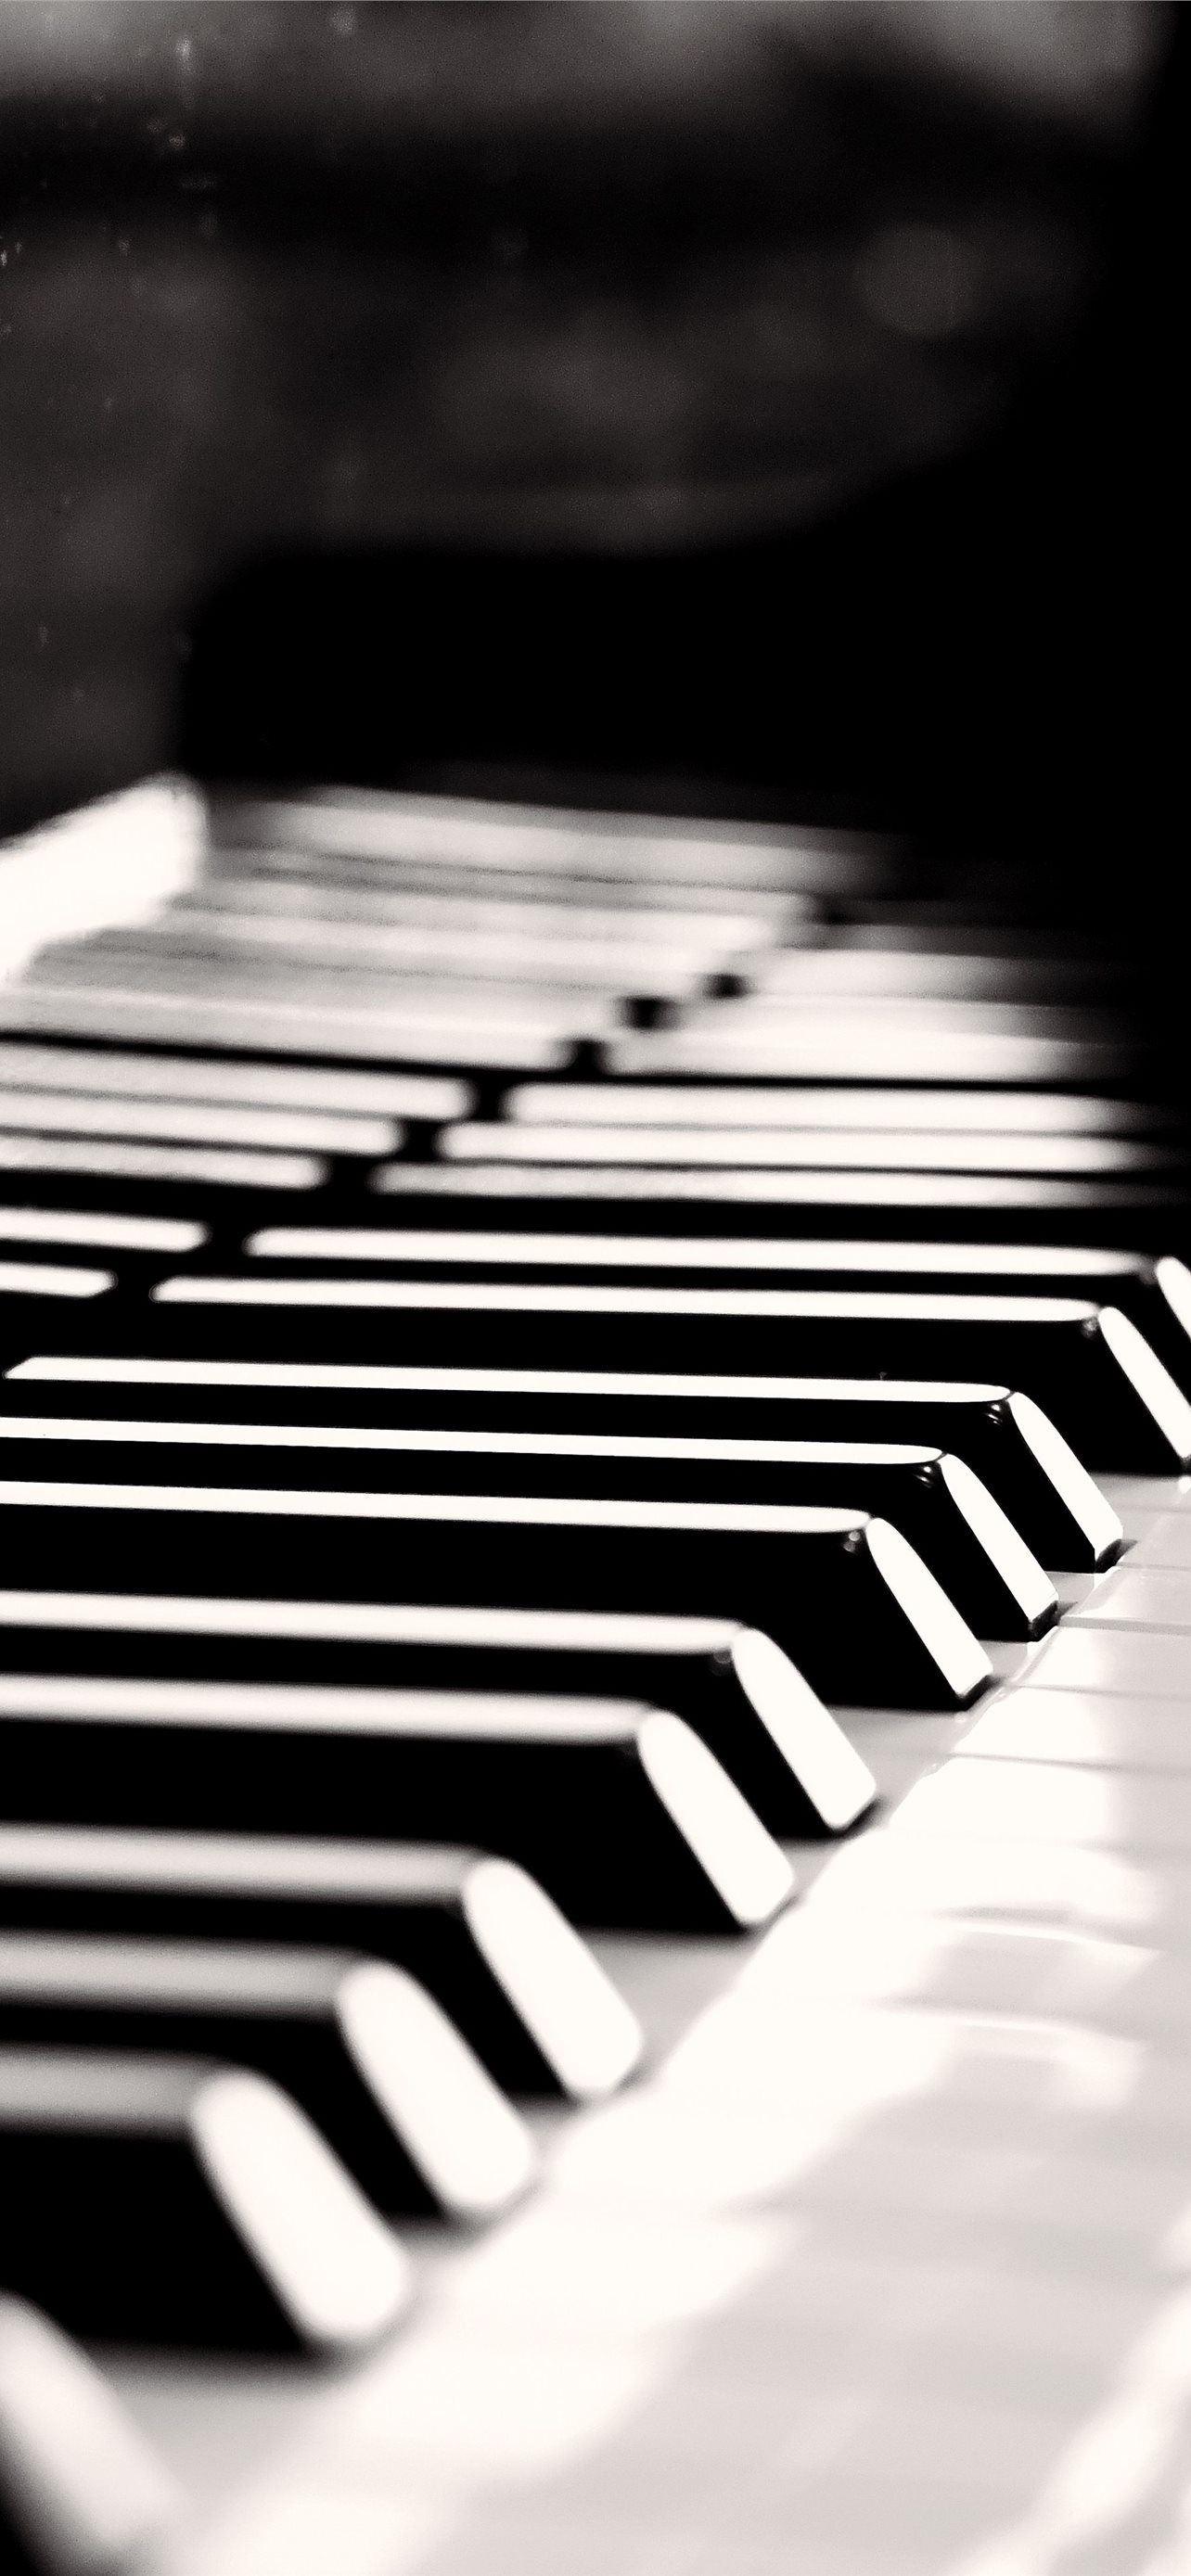 Musical Instruments: Piano, Black and white keys, The seven "natural" notes of each octave, The five half-tones. 1290x2780 HD Wallpaper.